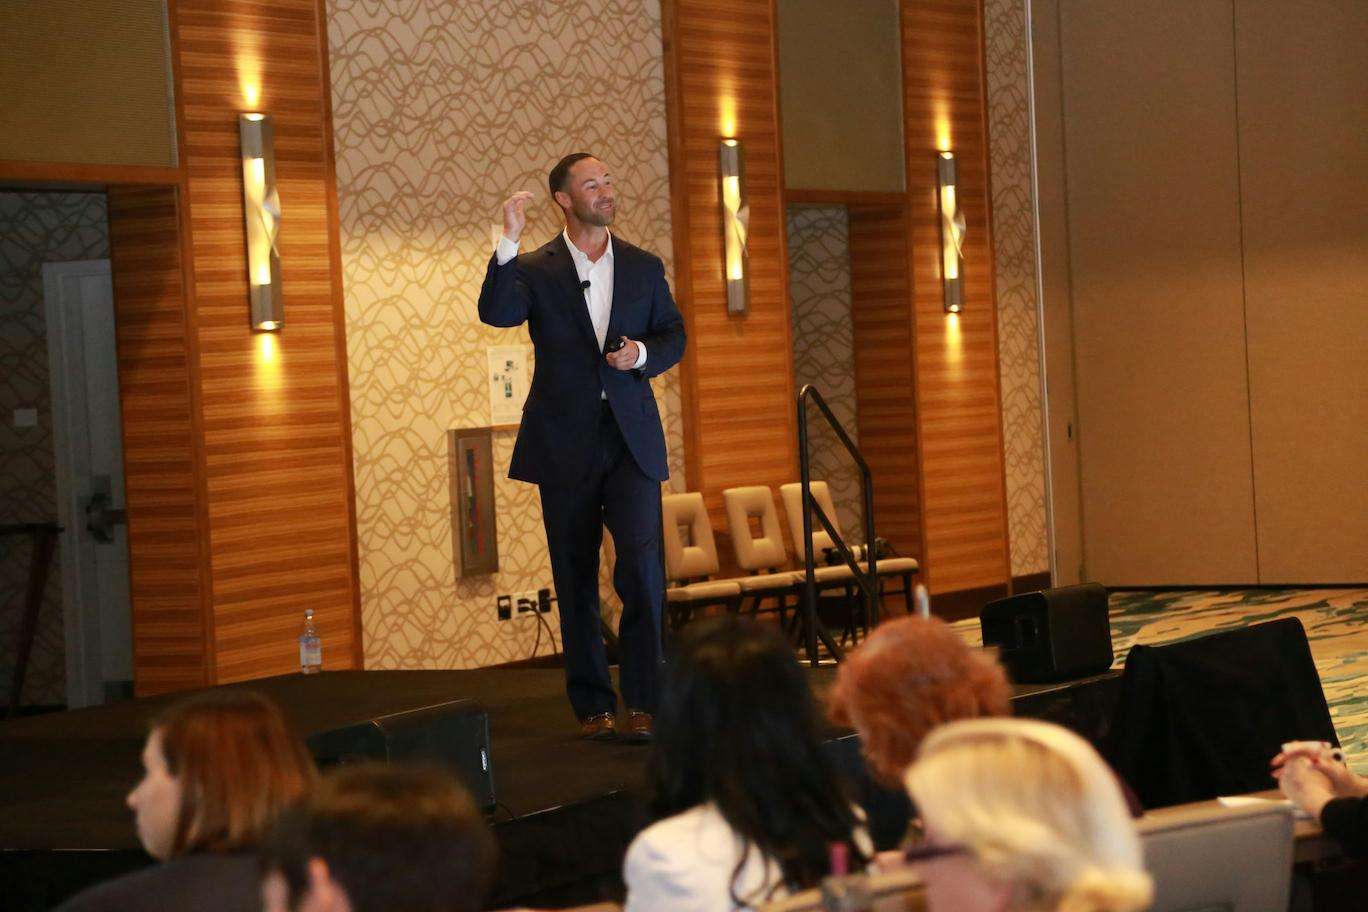 Top 15 Corporate Events Speakers Who Can Transform Your Business Event